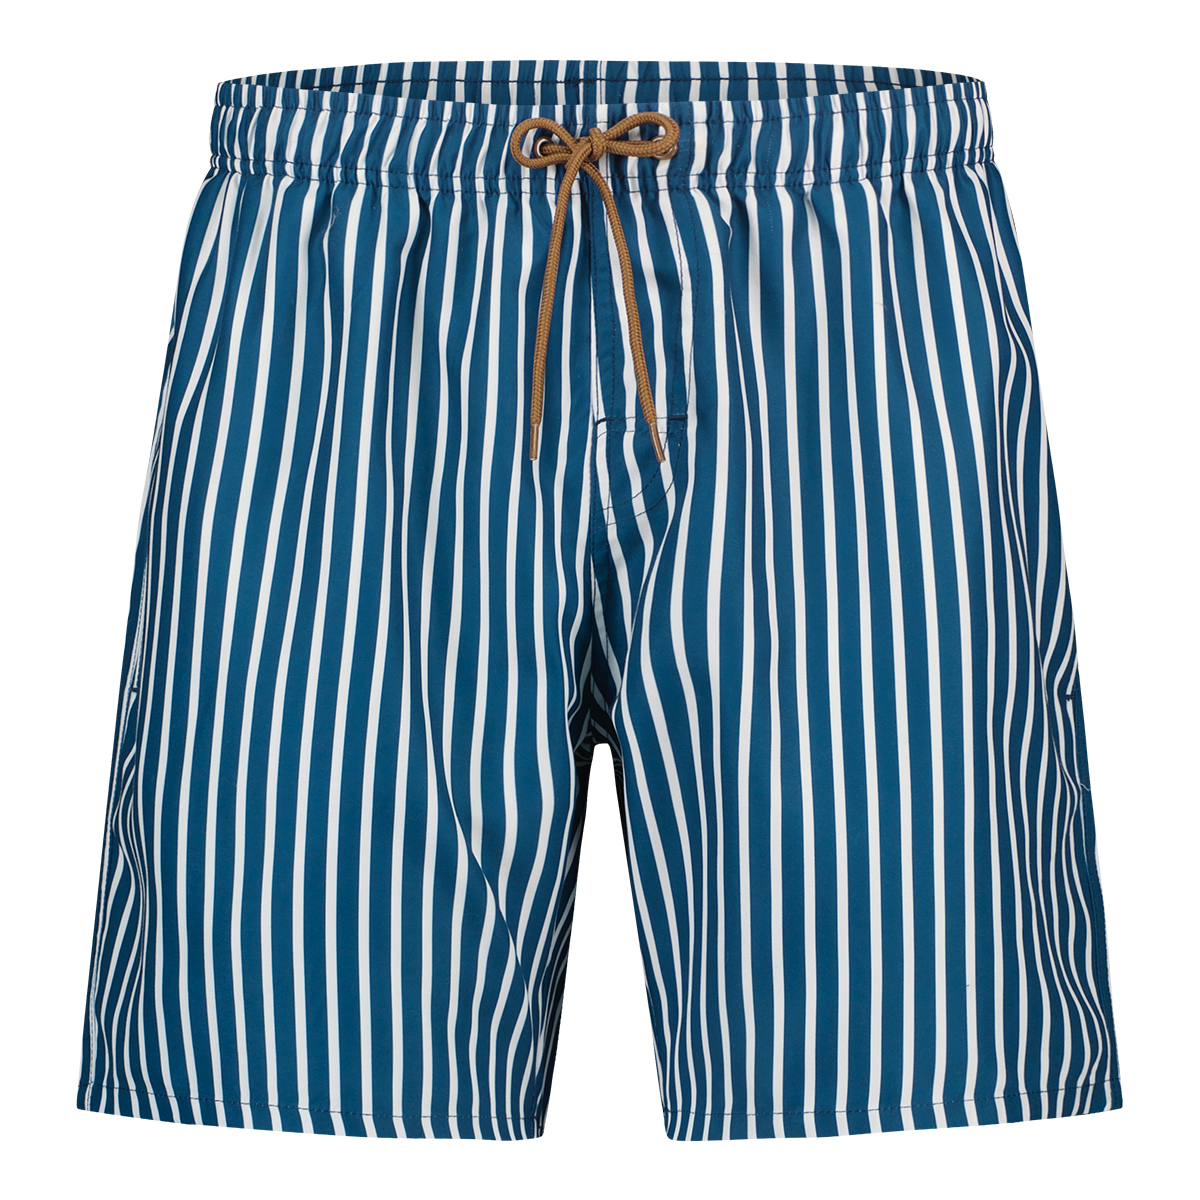 zwemshorts small stripes maat M